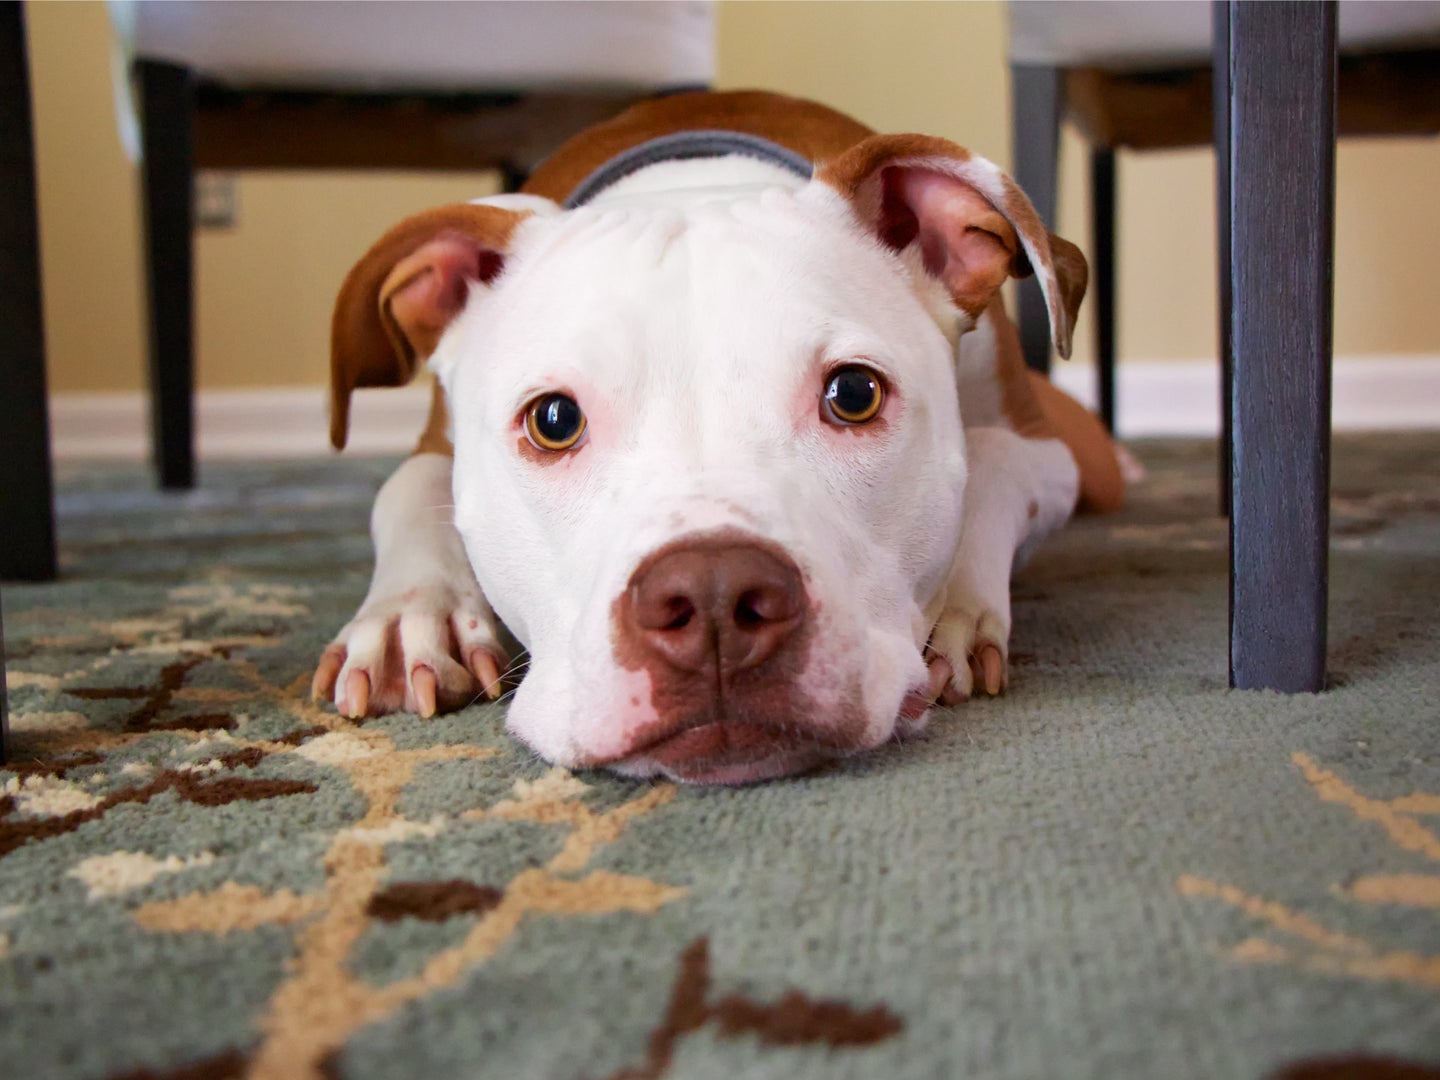 How to get rid of pet odor in your home | Popular Science